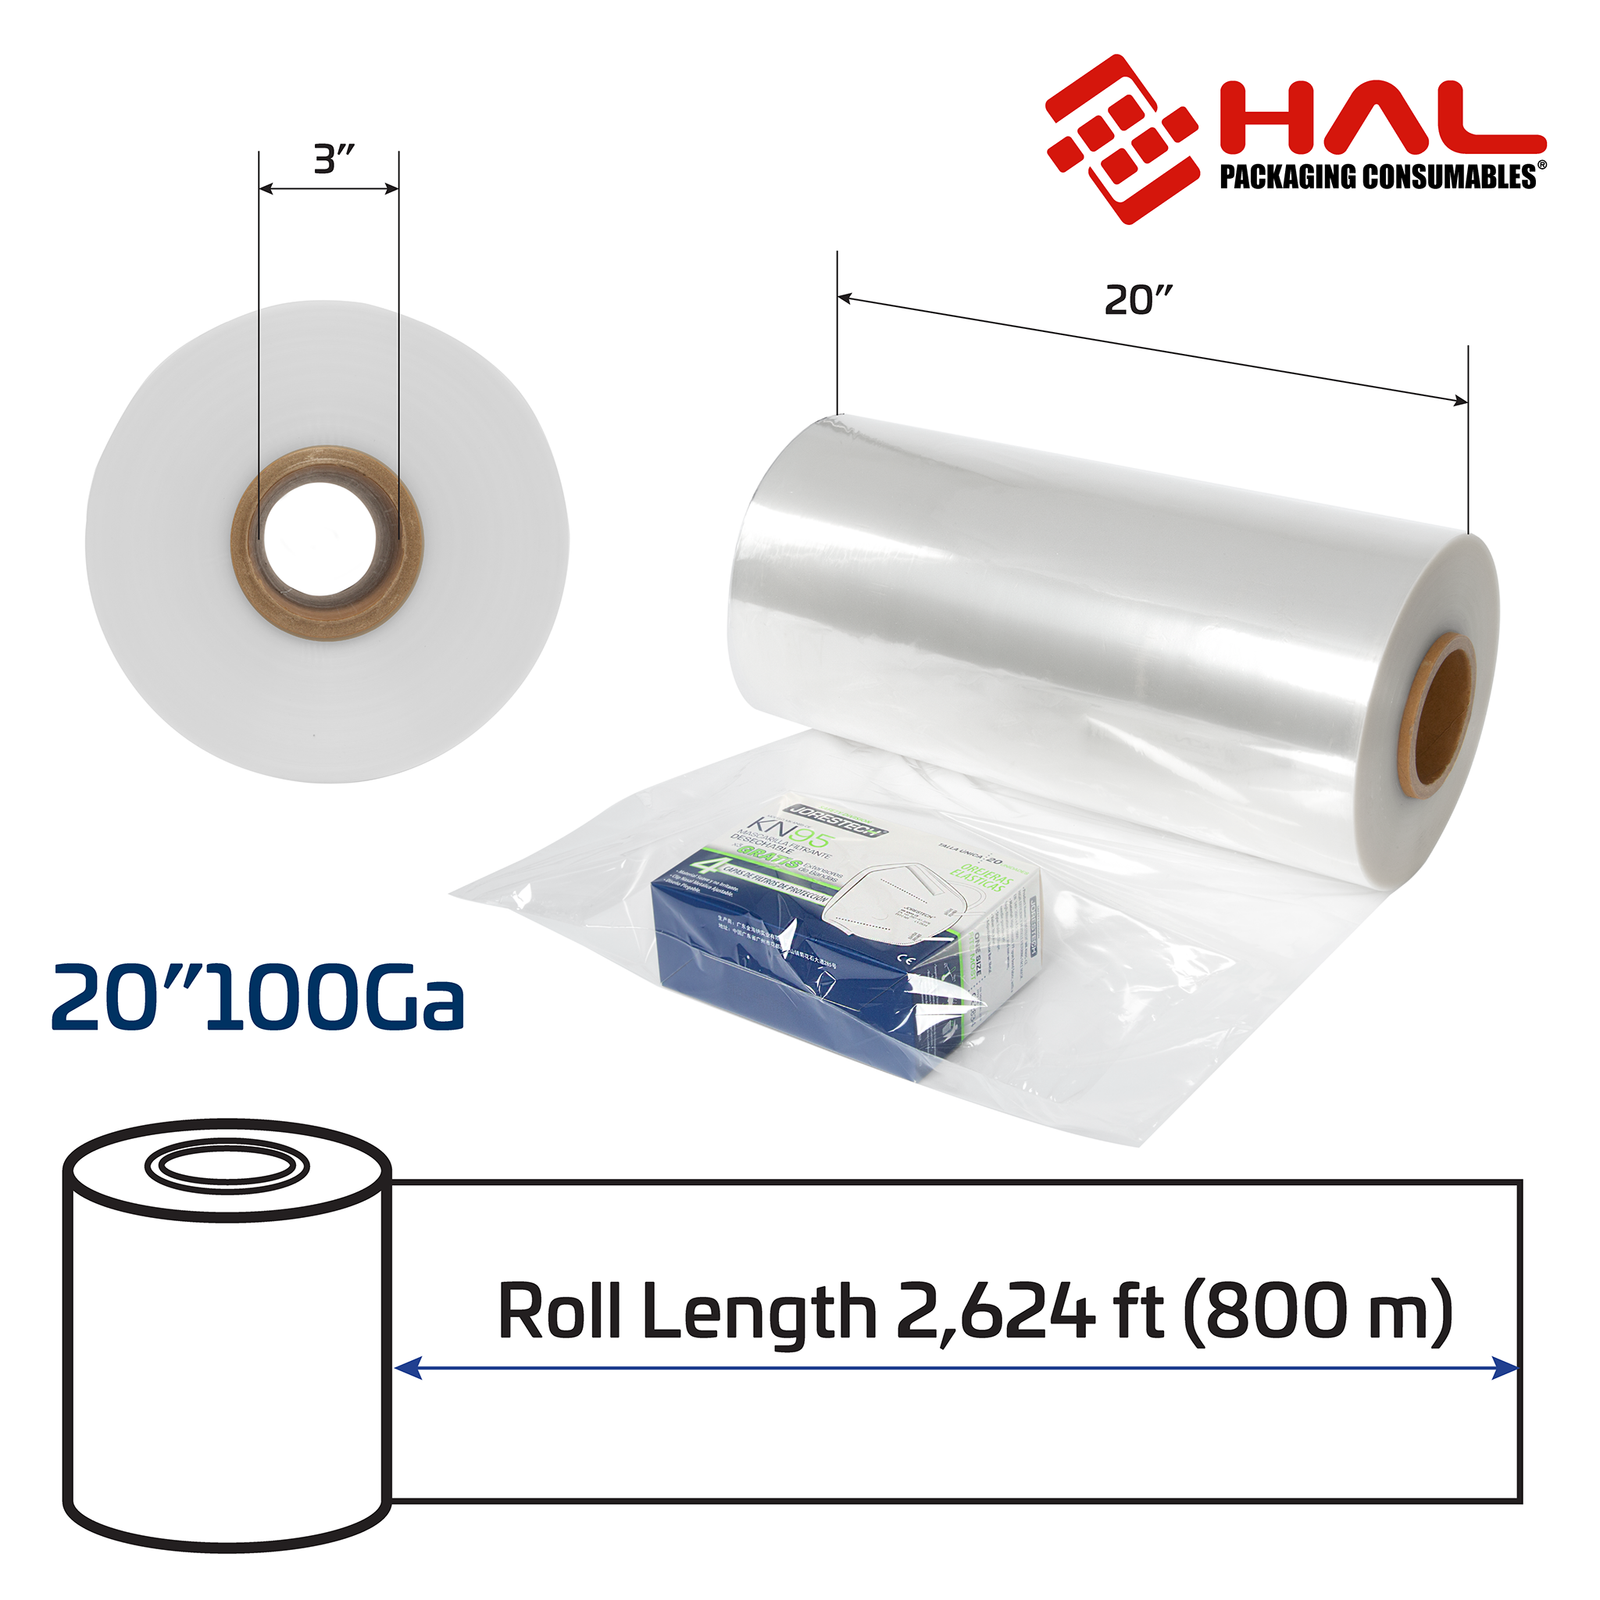 Measurements of the 100 gauge shrink wrapping film tube. 3 inch diameter of the inner core, and 20 inch width with a 2,624 ft. length (800 meters).